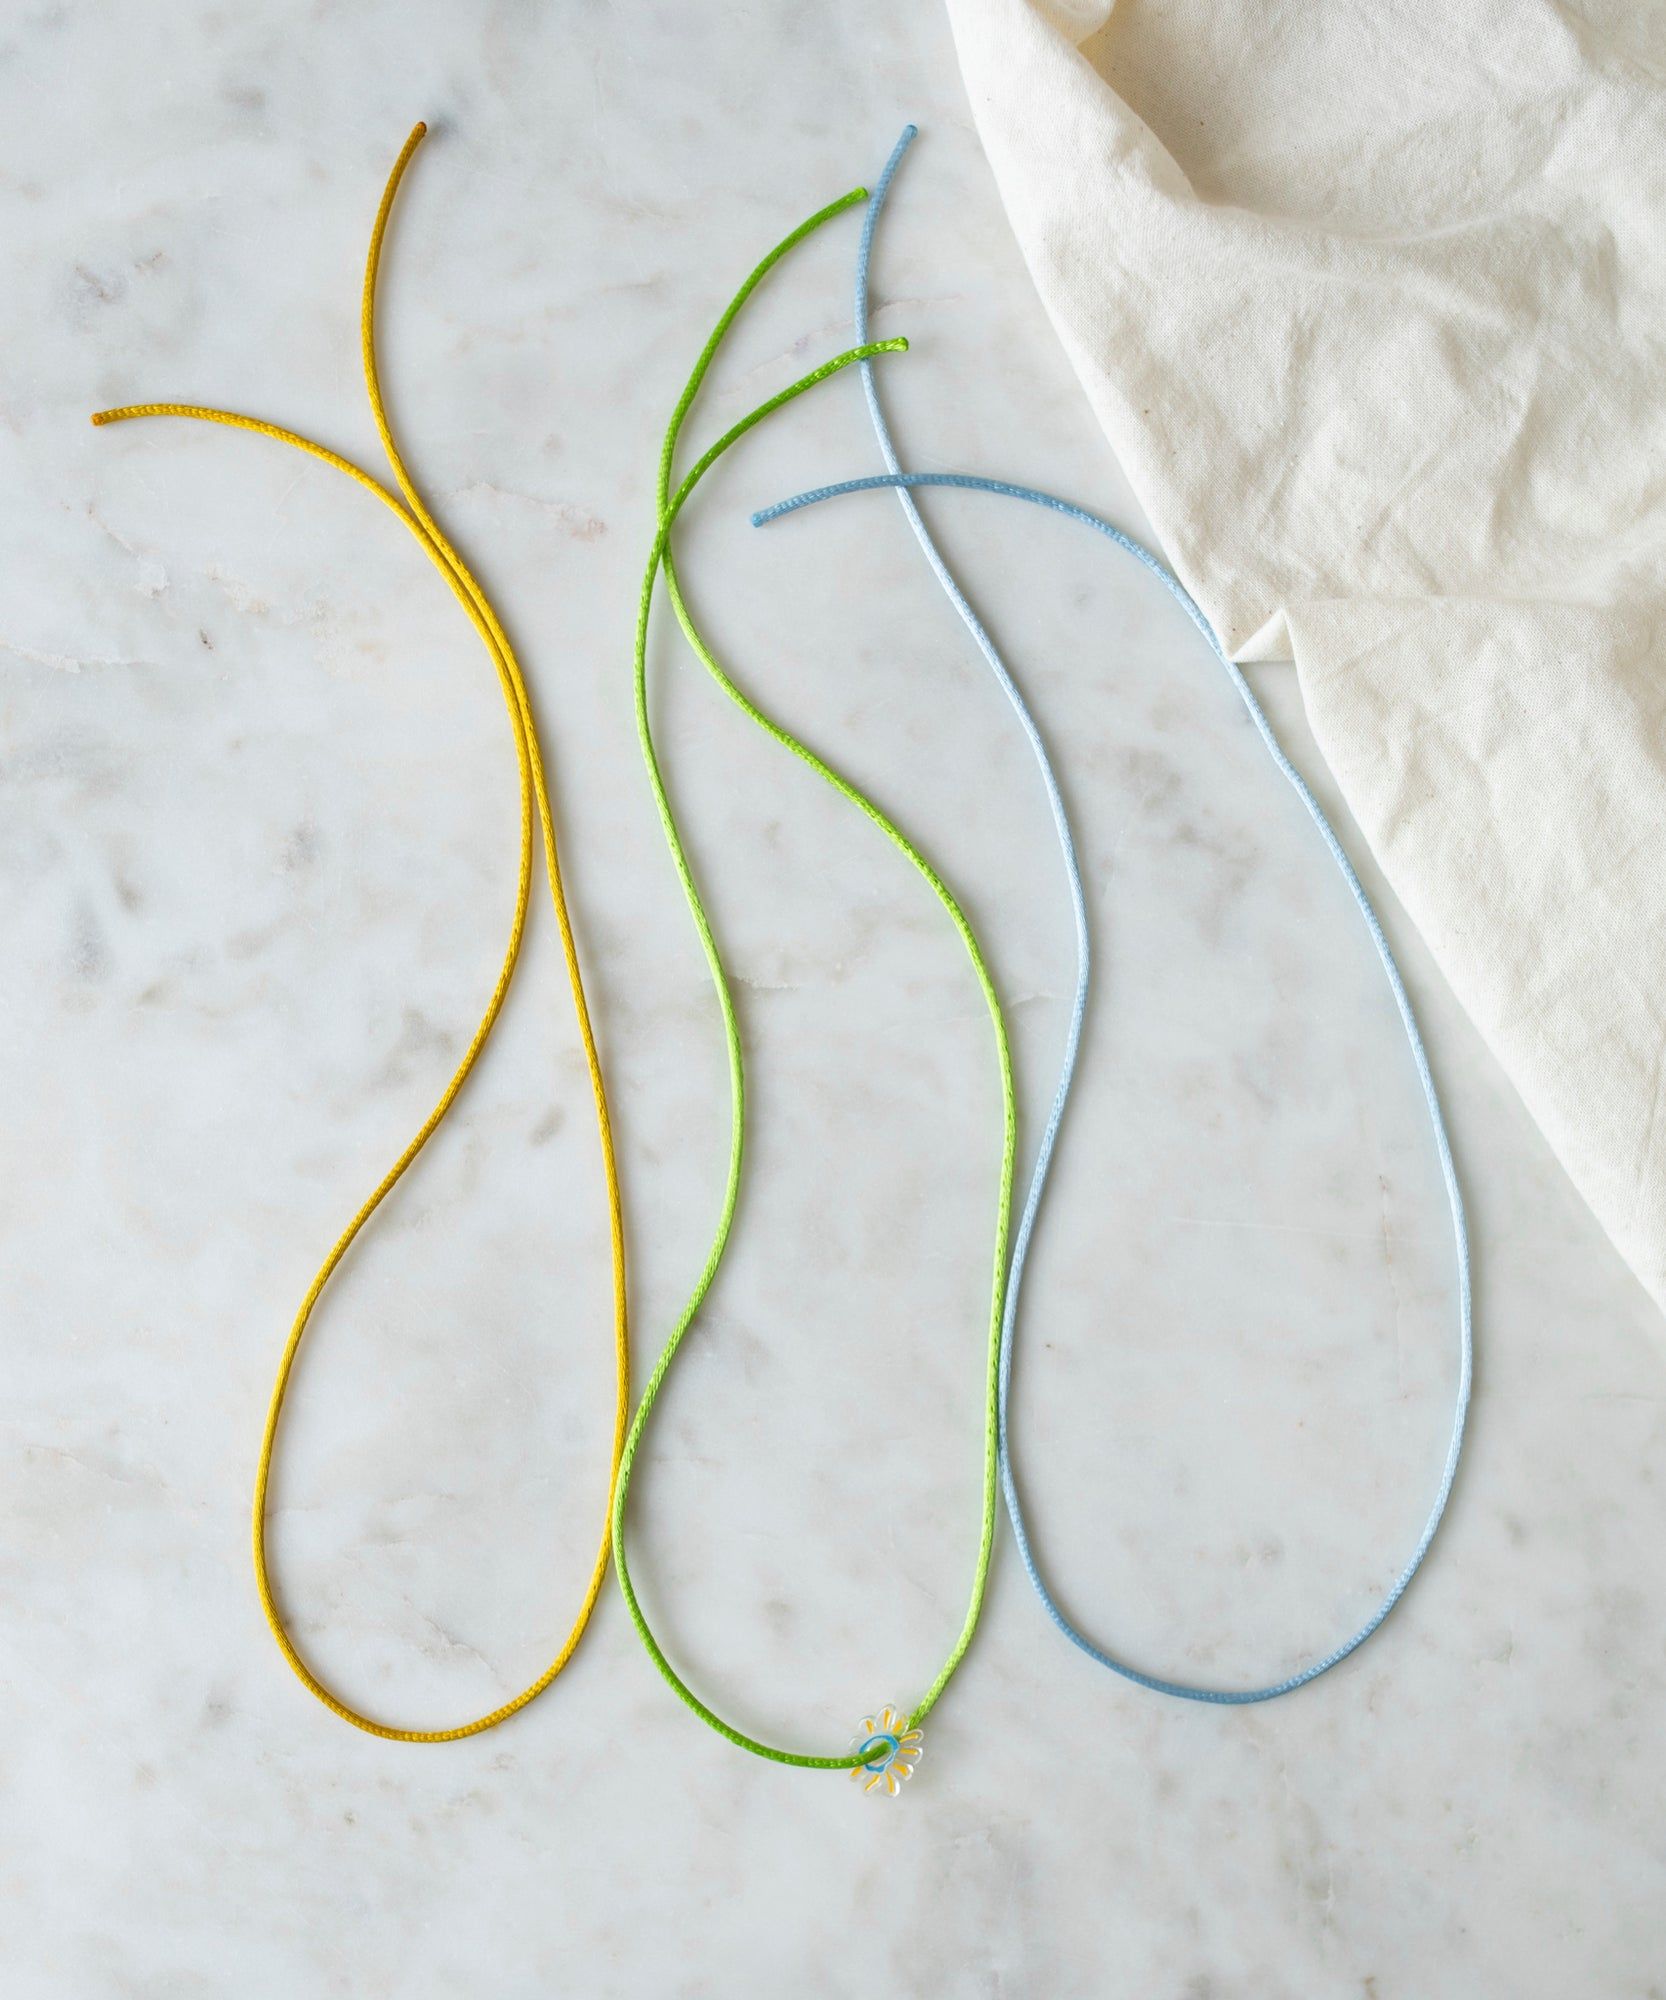 Three WALD World Ribbon Kit Bunt arranged in curved lines on a marble surface, with pendants partially visible.